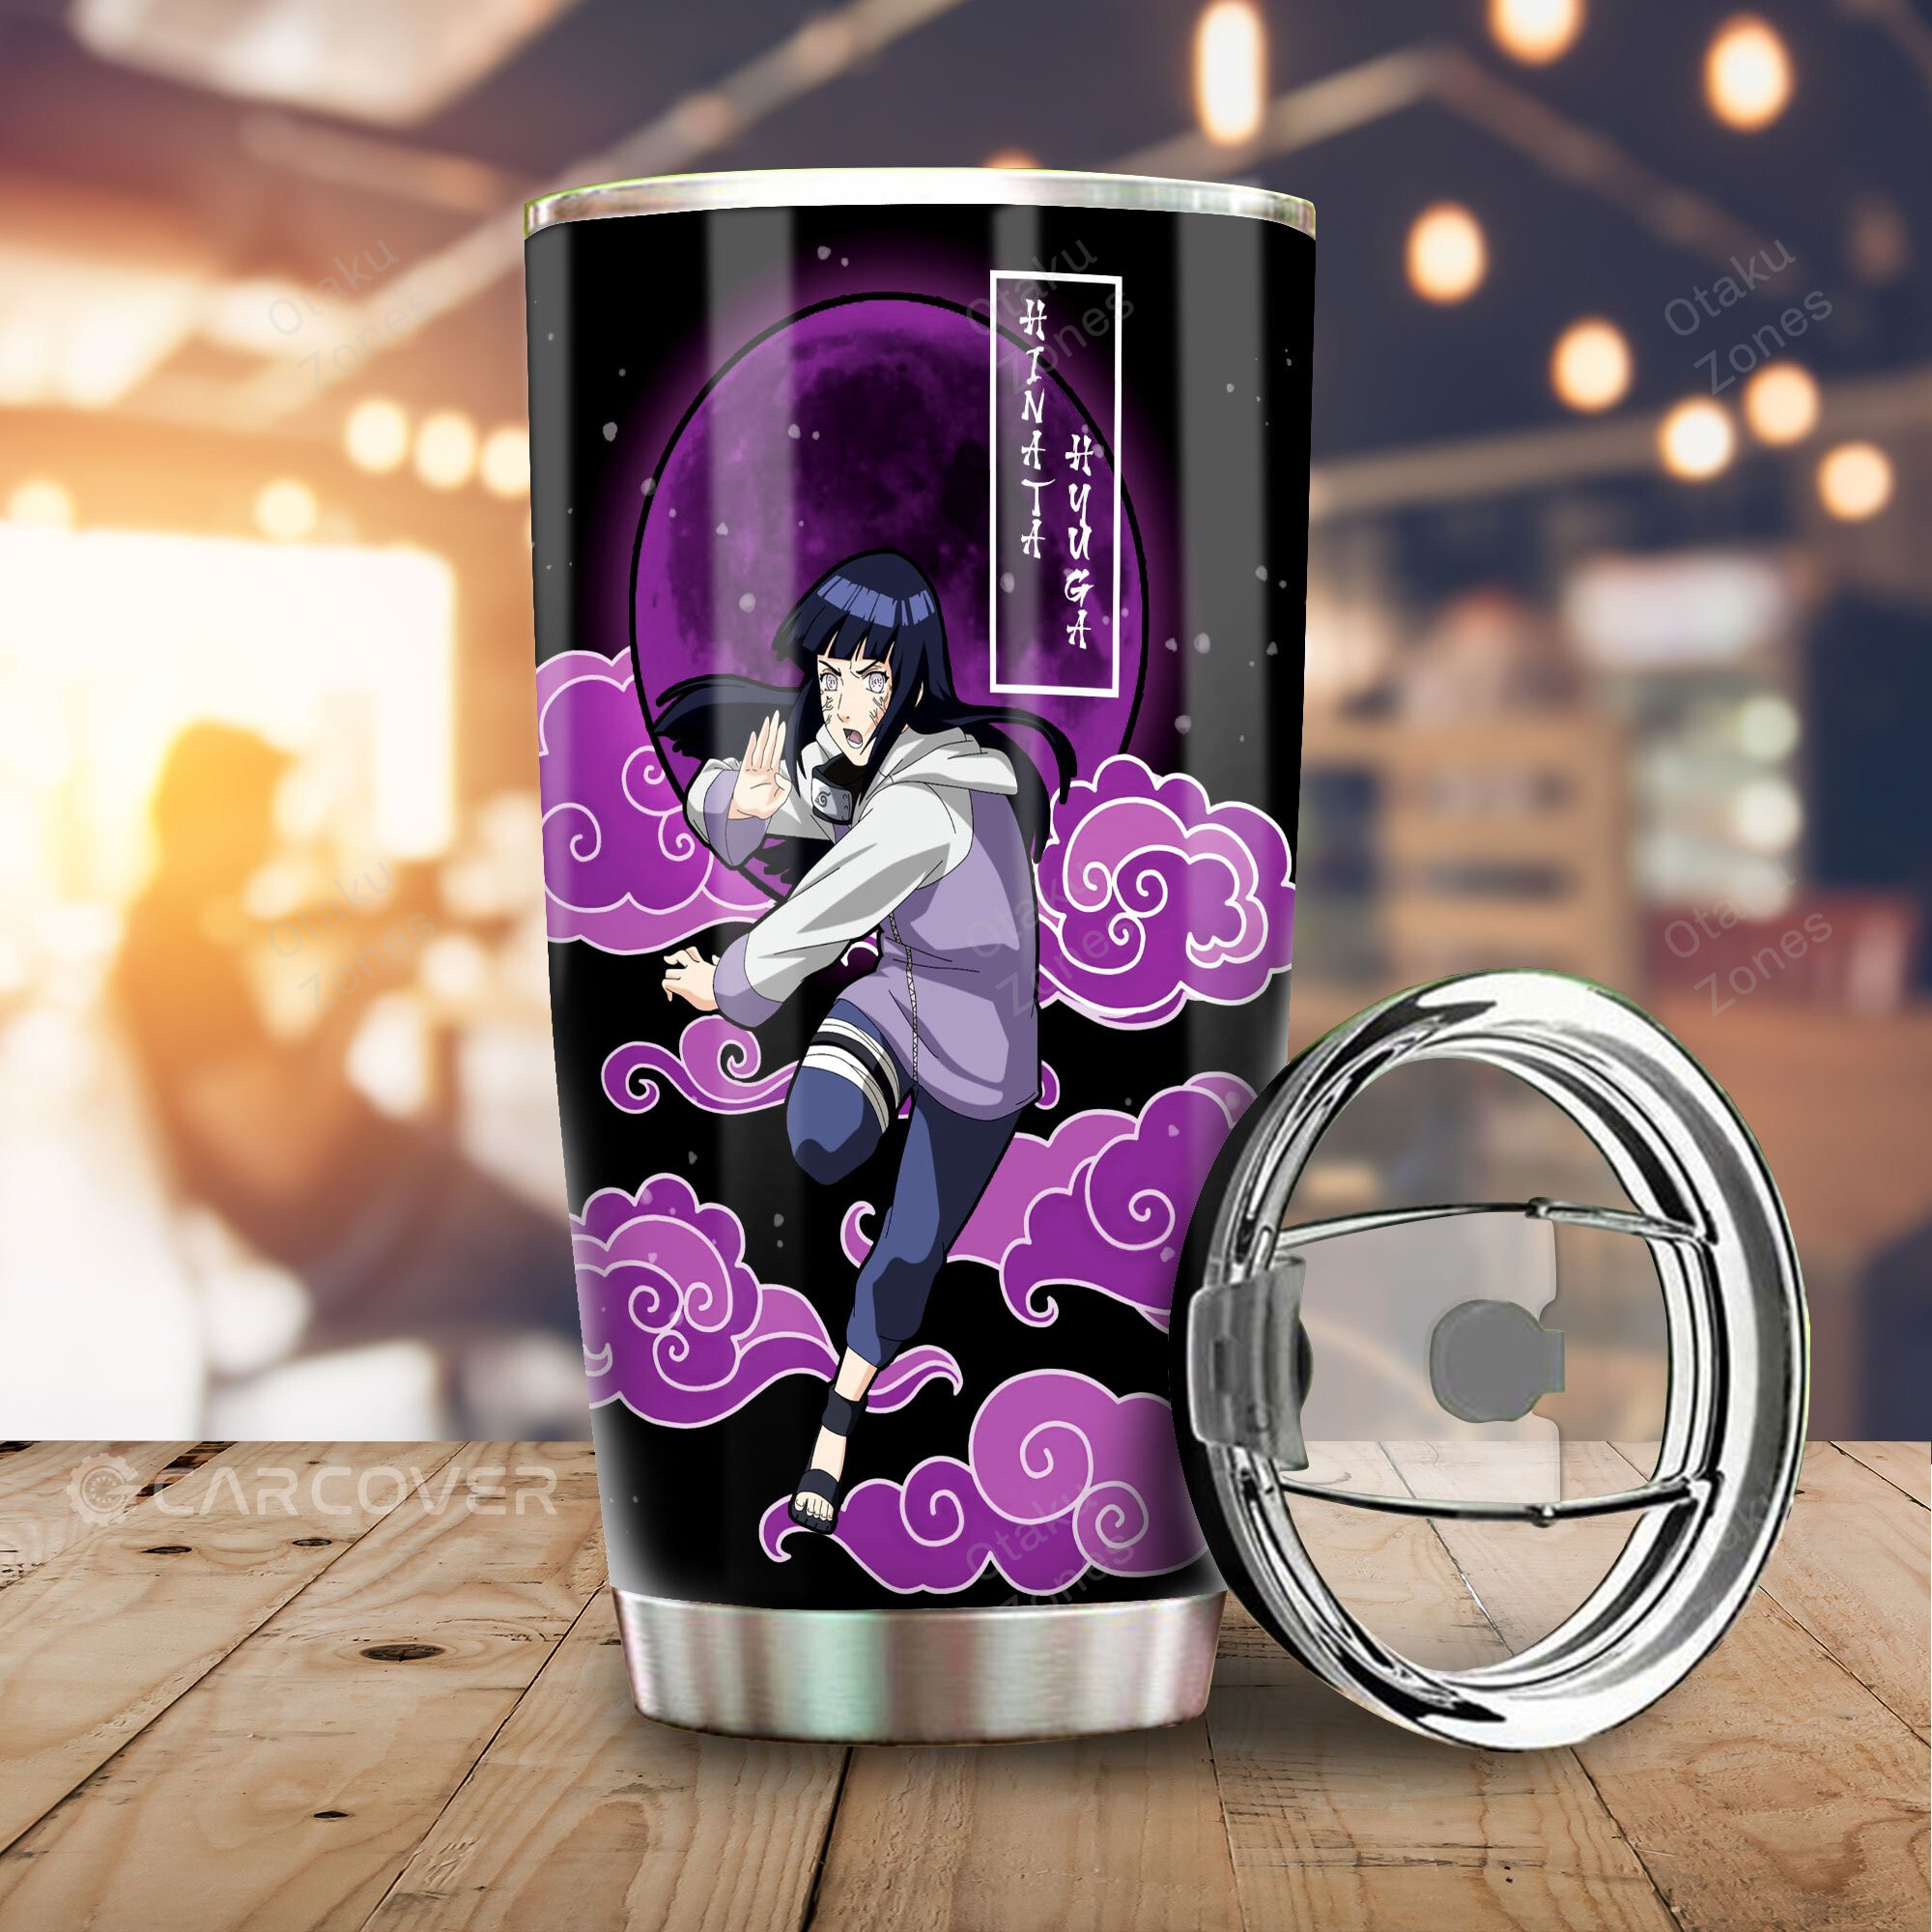 Show Off Your Favorite Anime Character In Style With These Products Word1